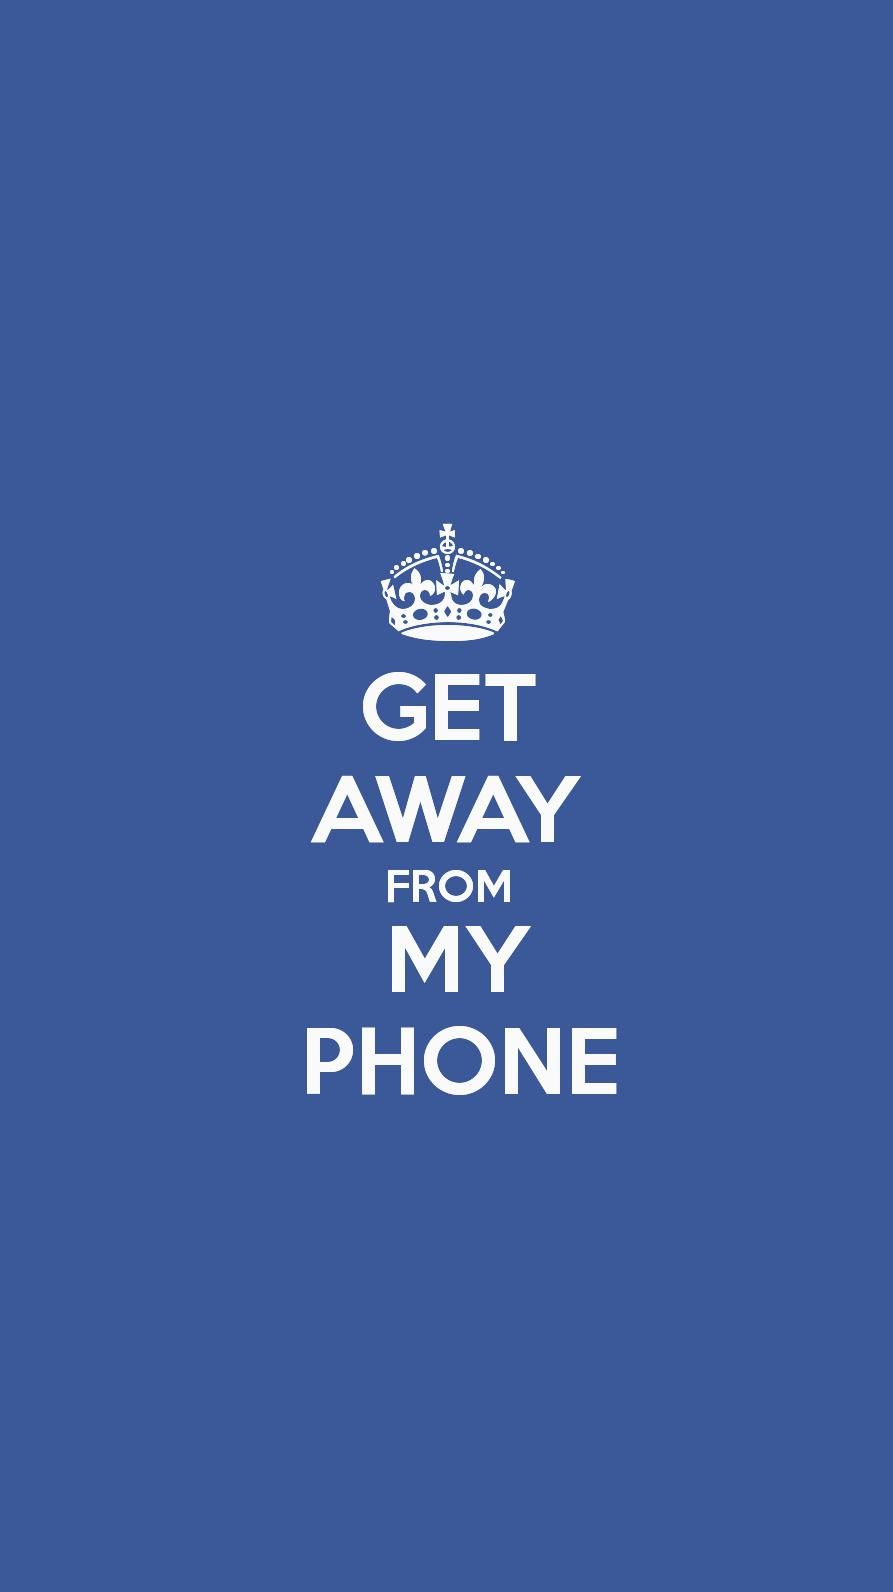 Get Off My Phone Wallpaper  Cool wallpapers for phones Get off me Phone  lock screen wallpaper